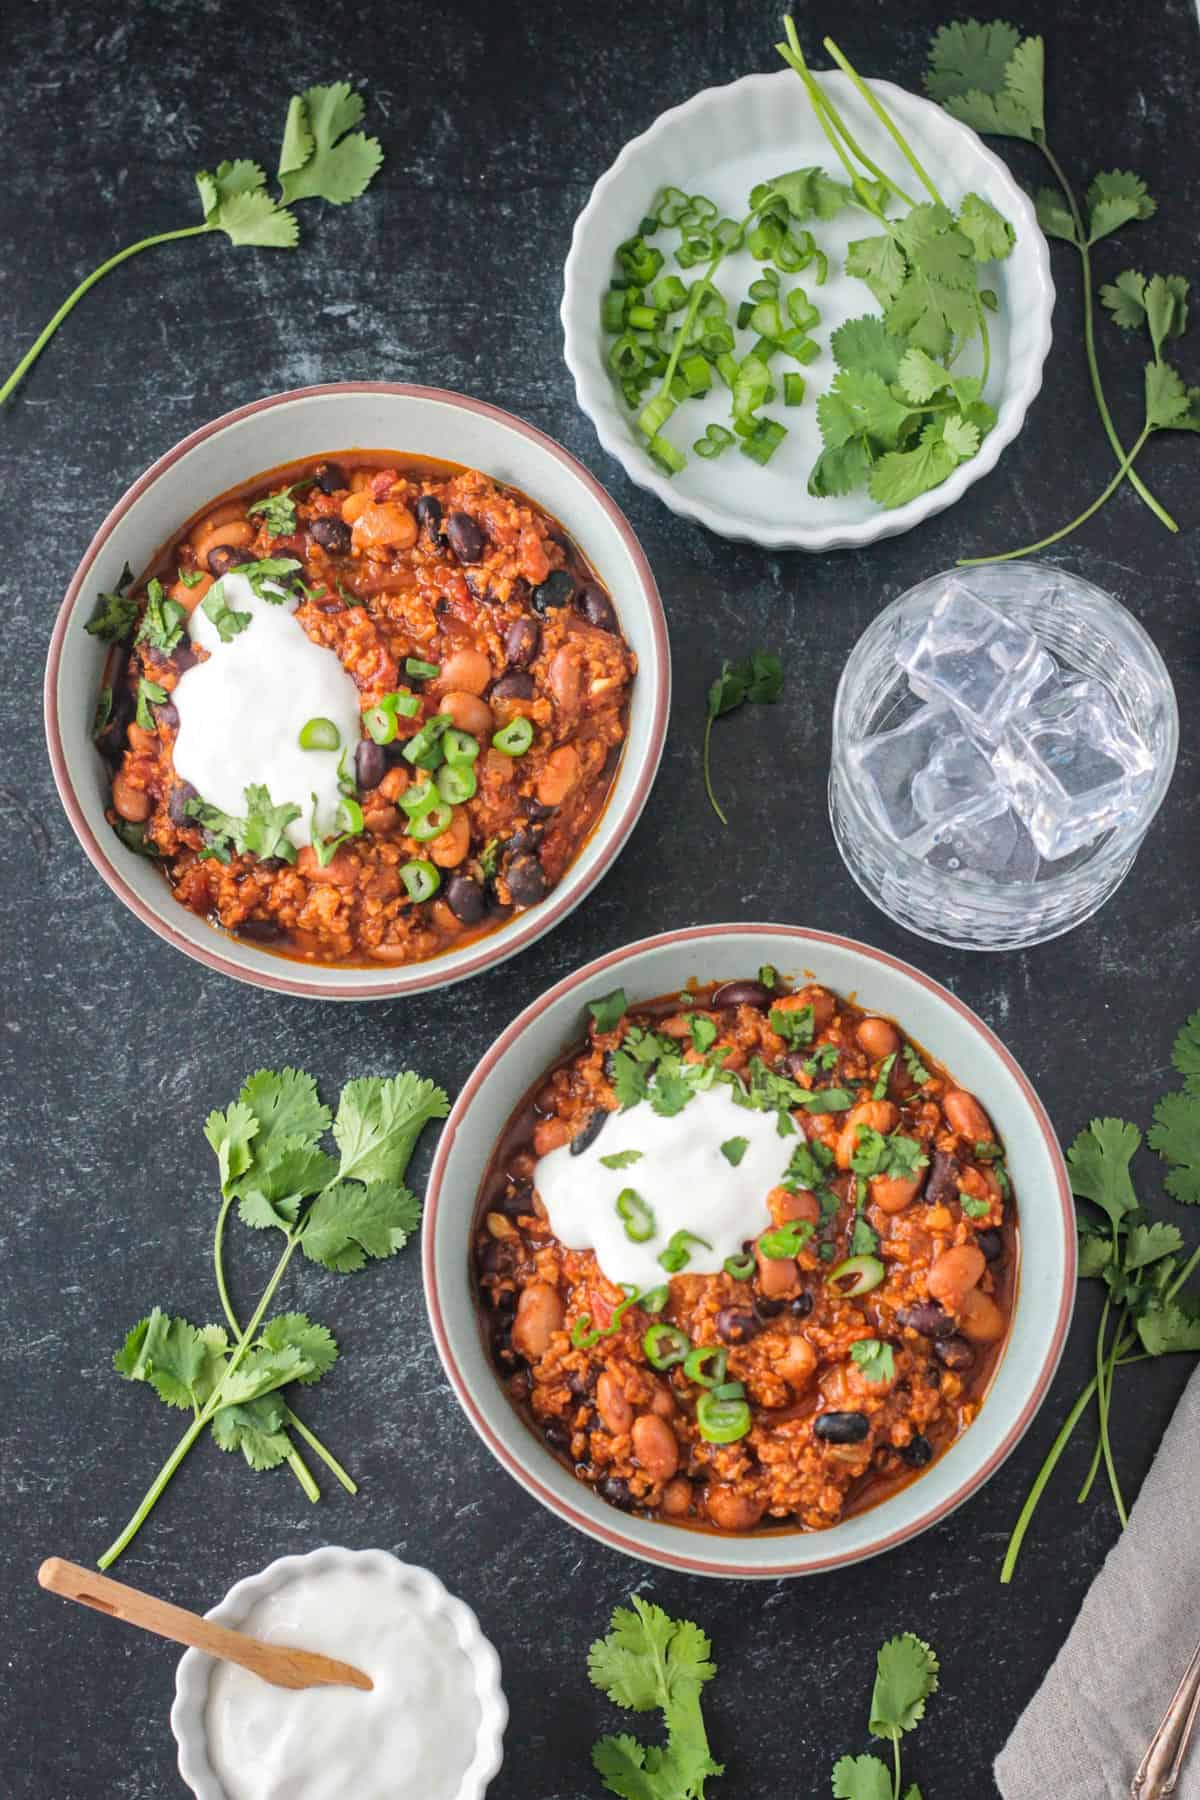 Two bowls of thick chili next to a glass of water.